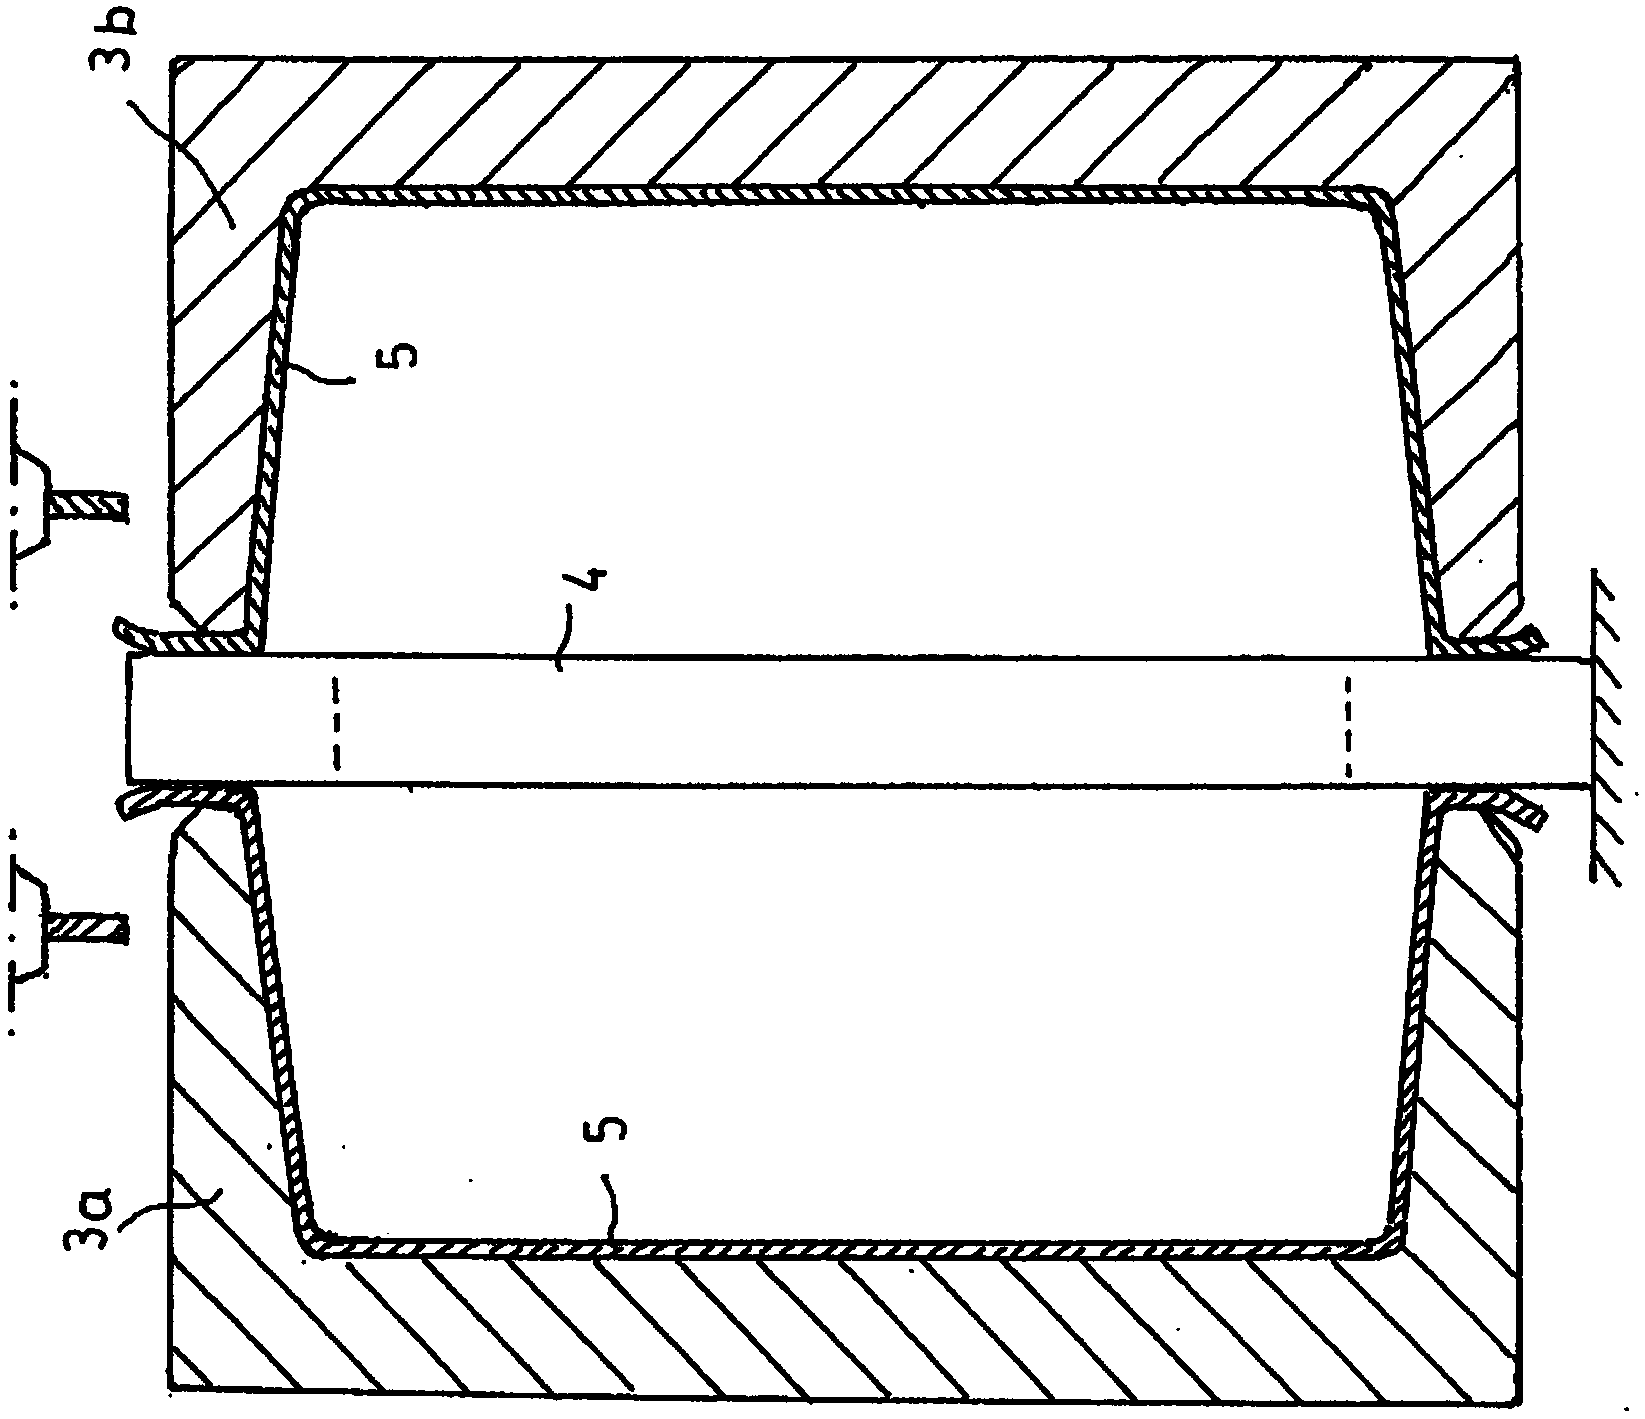 Extrusion-blow-molded fuel tank of thermoplastic material and method for the production thereof